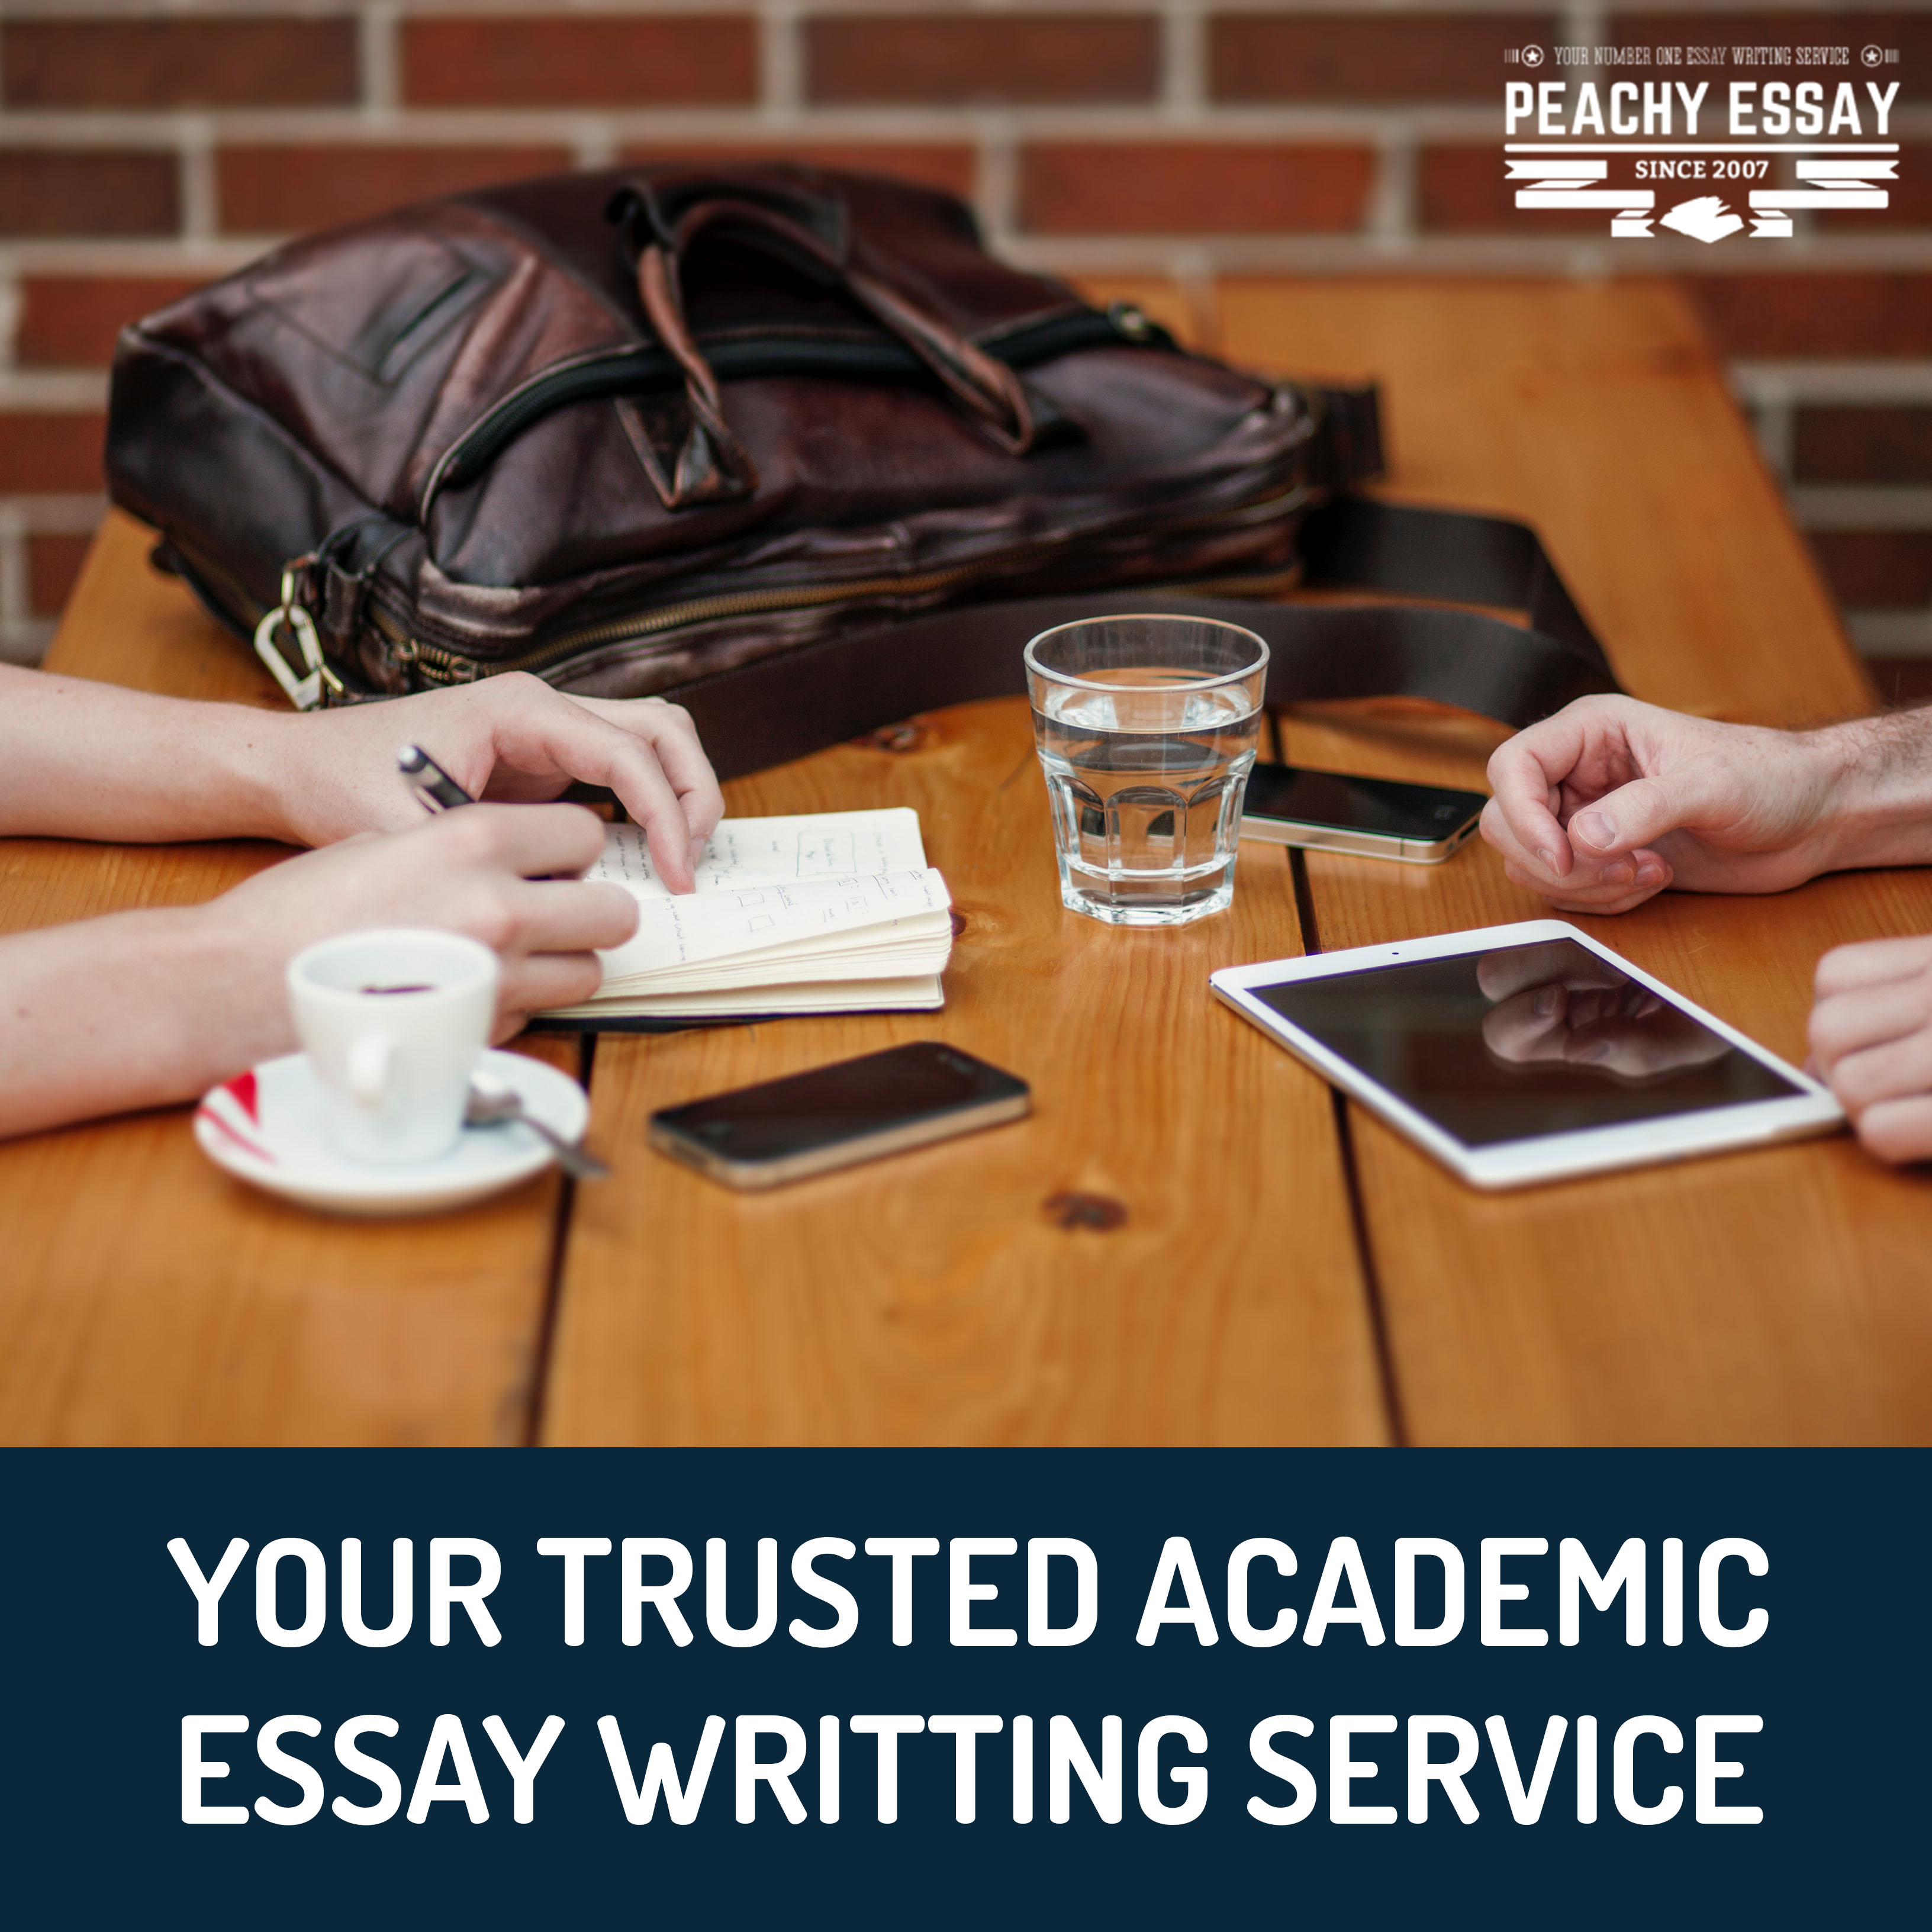 Academic essay writer for hire us